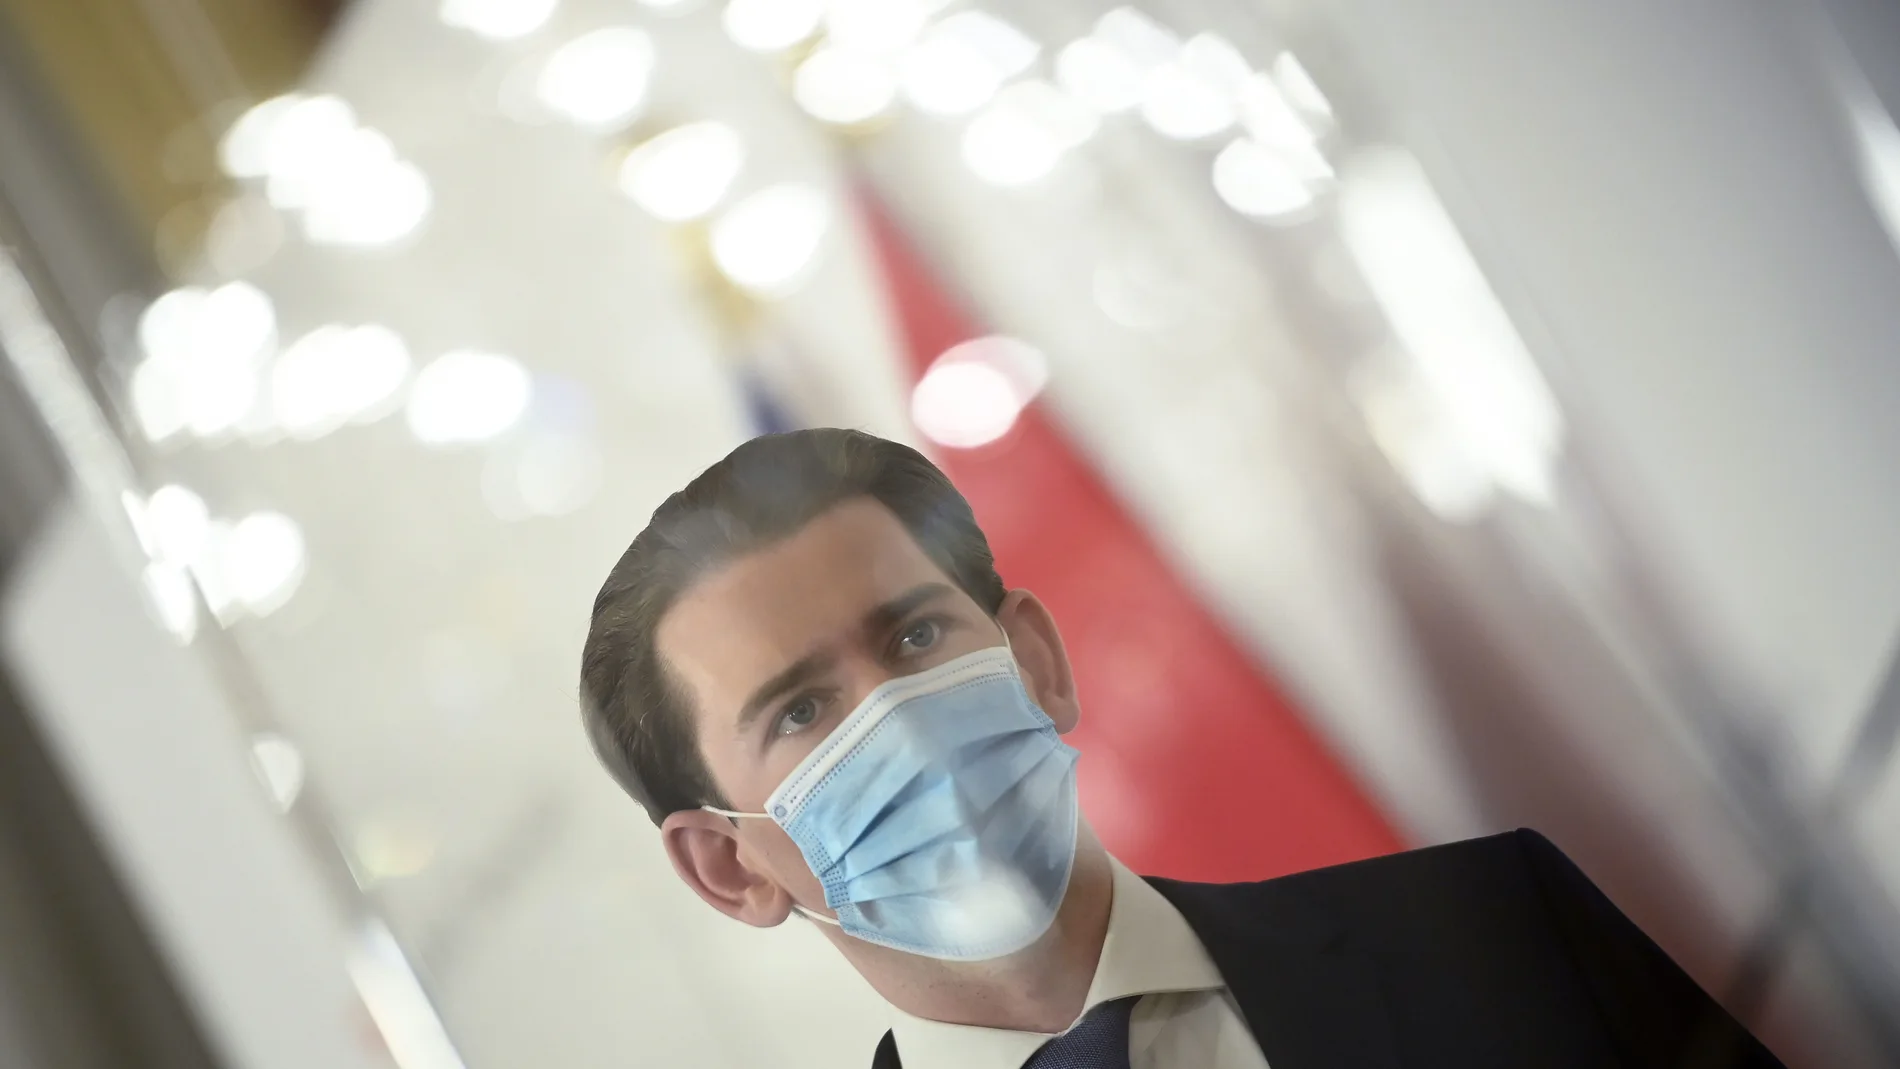 Vienna (Austria), 14/11/2020.- Austrian Chancellor Sebastian Kurz wears a mask during a press conference at the Austrian Chancellery in Vienna, Austria, 14 November 2020. The Austrian government announces to tighten and extend the current lockdown to slow down the ongoing pandemic of the COVID-19 disease caused by the SARS-CoV-2 coronavirus. Stricter measures include restrictions concerning the movement of individuals and the closing of all non essential businesses and educational institutions. (Viena) EFE/EPA/CHRISTIAN BRUNA